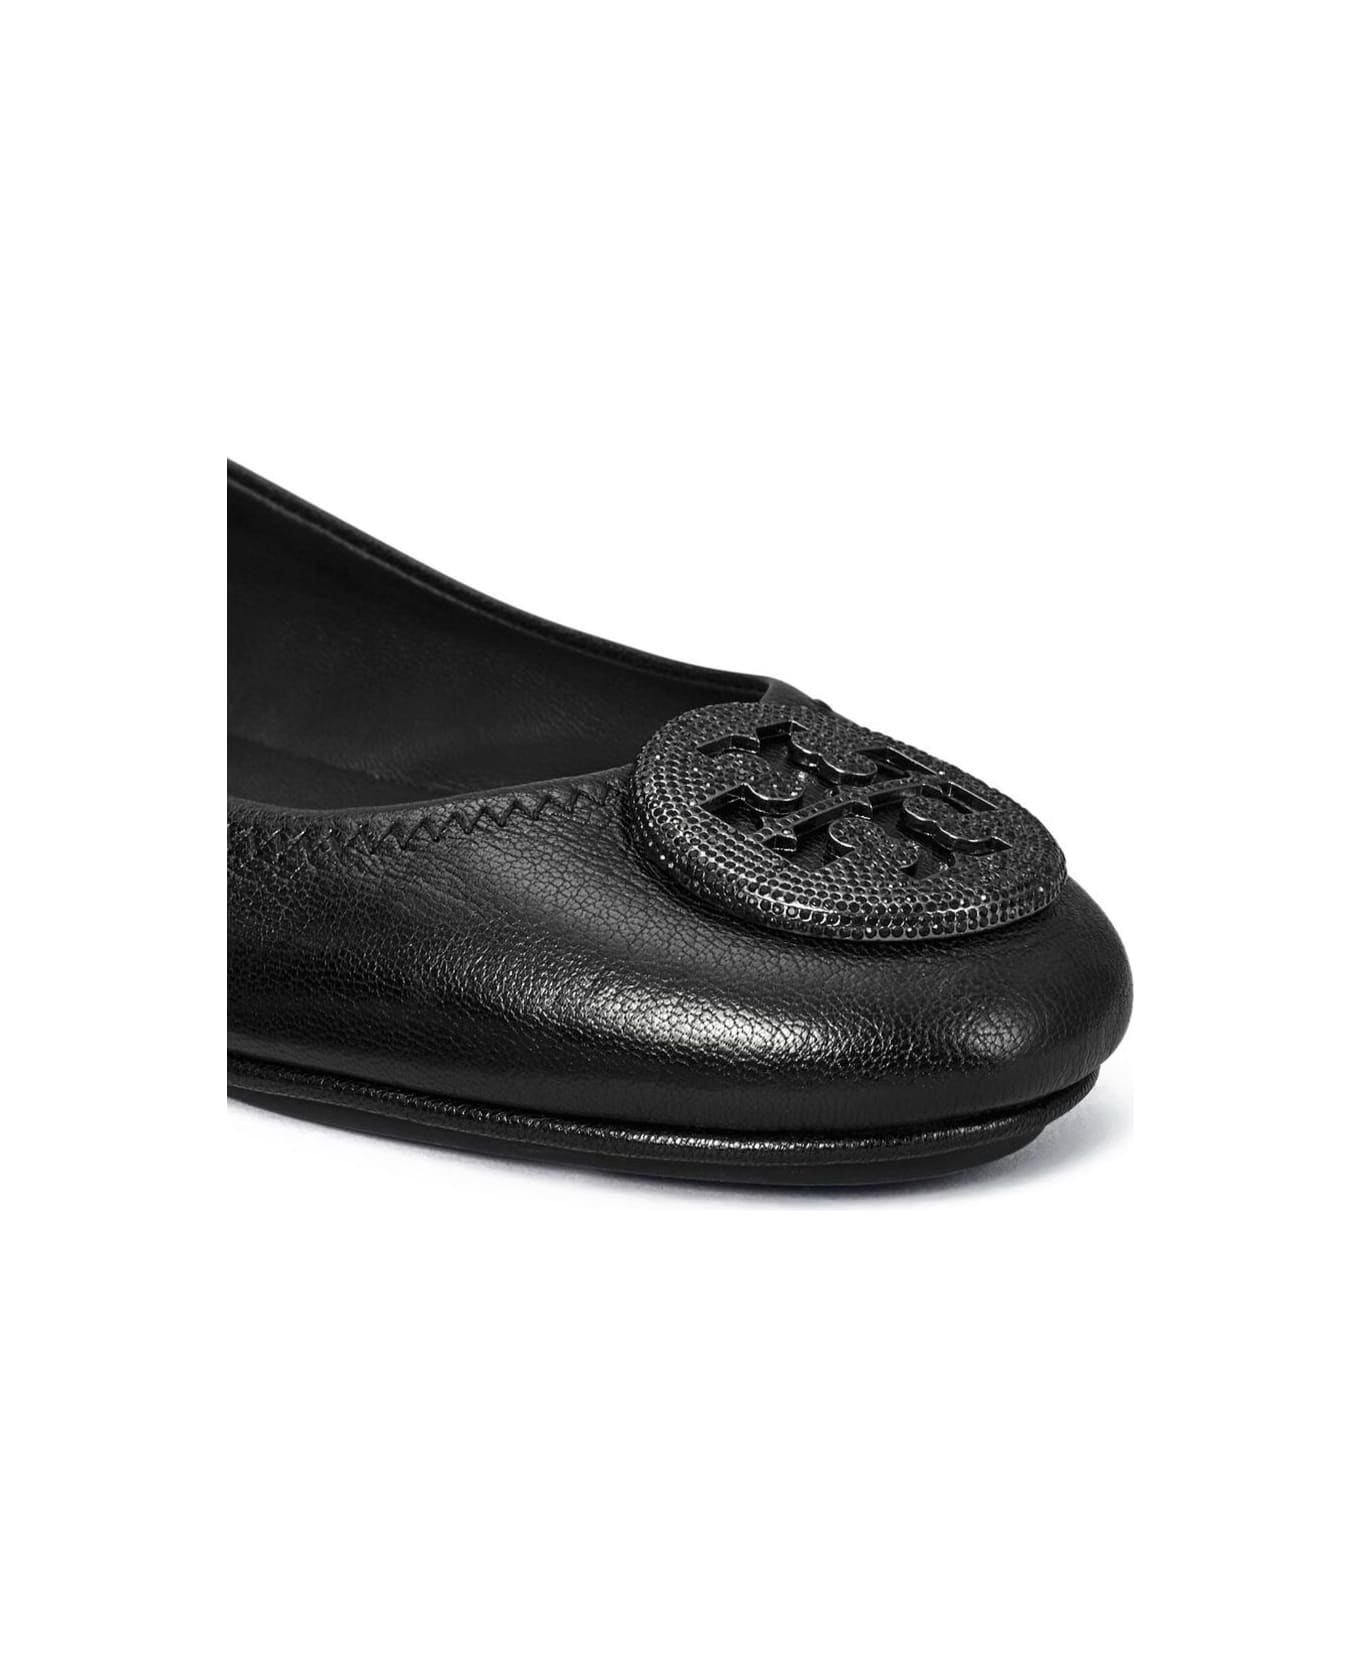 Tory Burch 'minnie' Black Ballet Flats With Crystal Embellished Logo In Leather Woman Tory Burch - Metallic